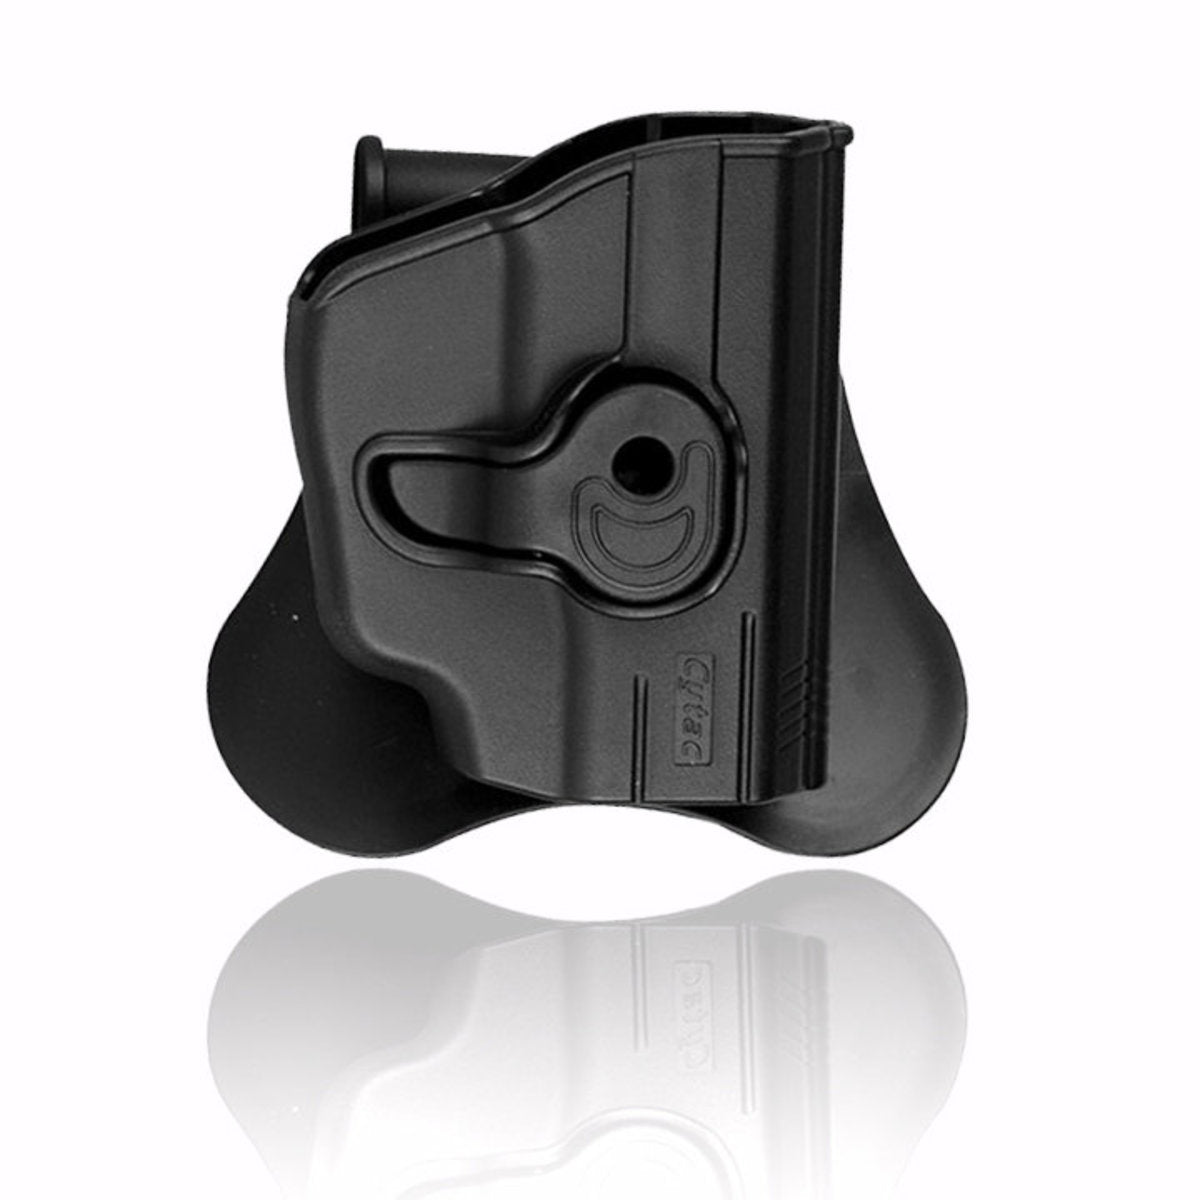 Cytac Owb Holster - Fits Ruger Lc9 With Crimson Trace Laser